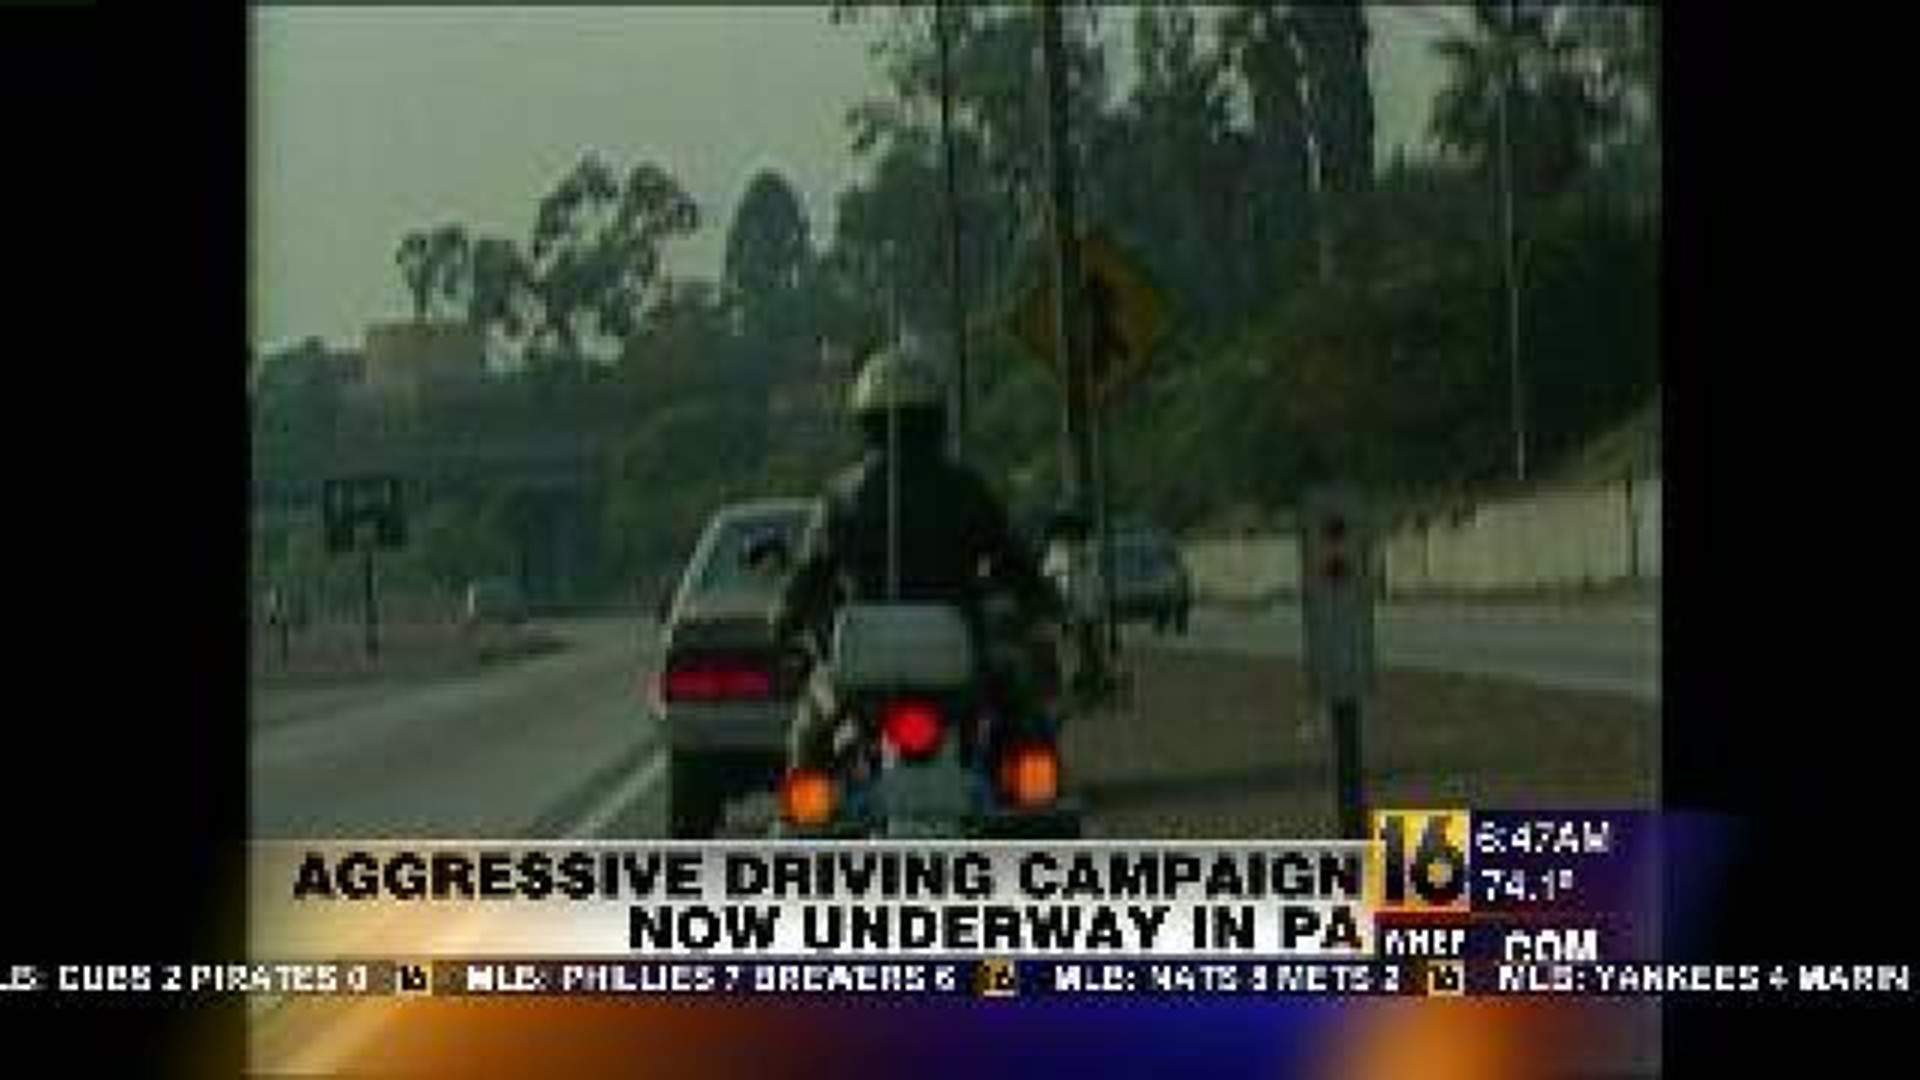 PennDOT Launches Aggressive Driving Campaign